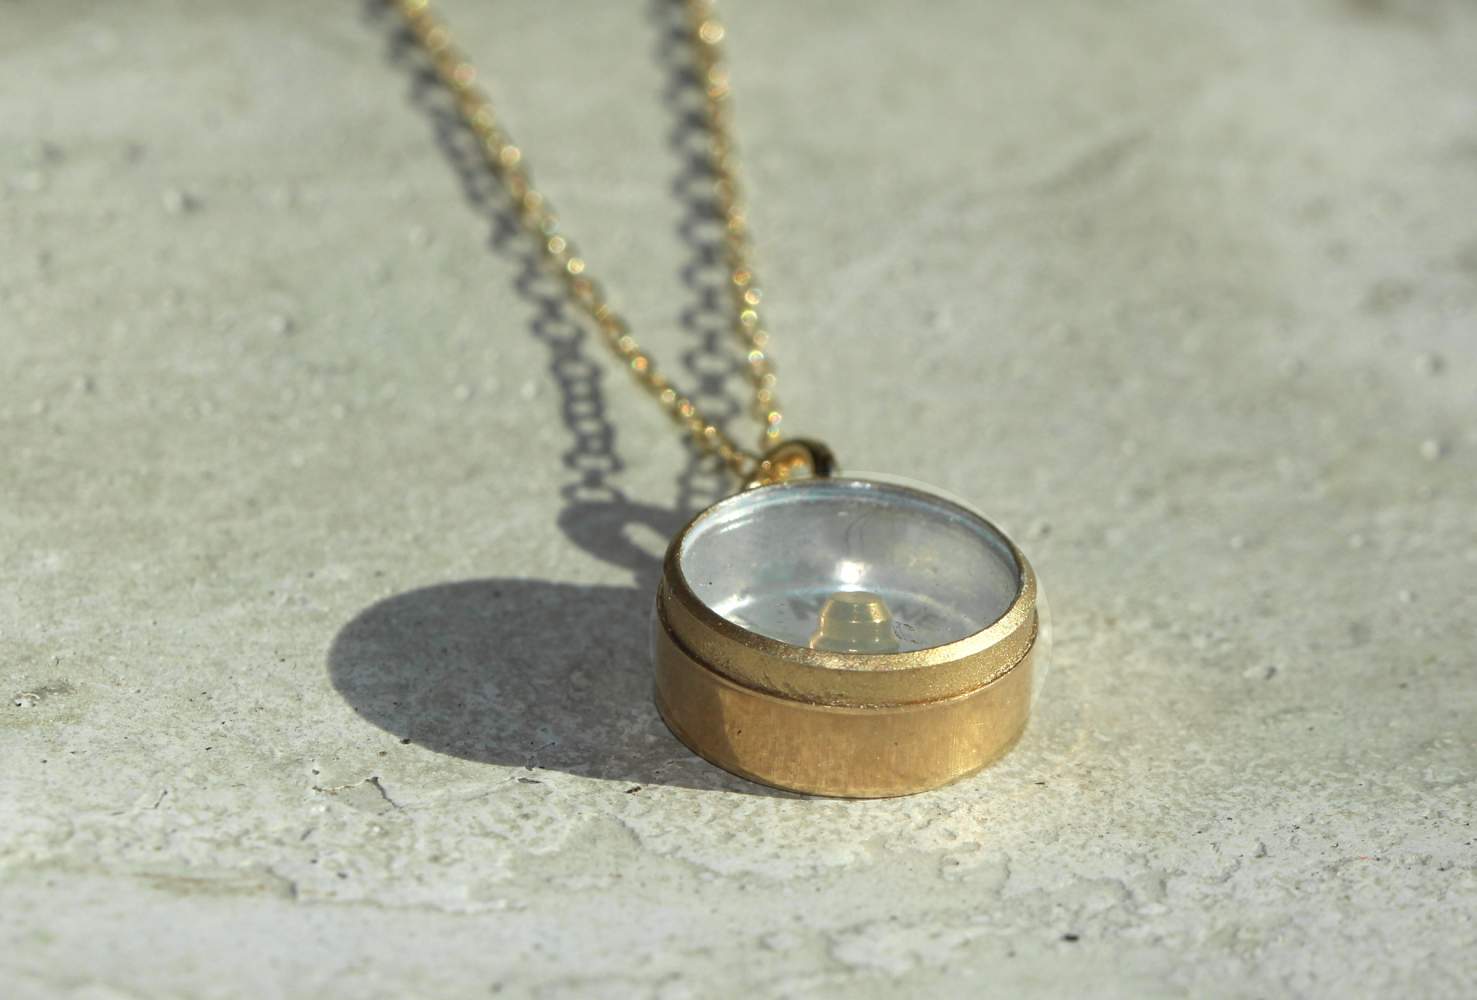 Dainty gold working compass necklace. 18k gold vermeil plated sterling silver